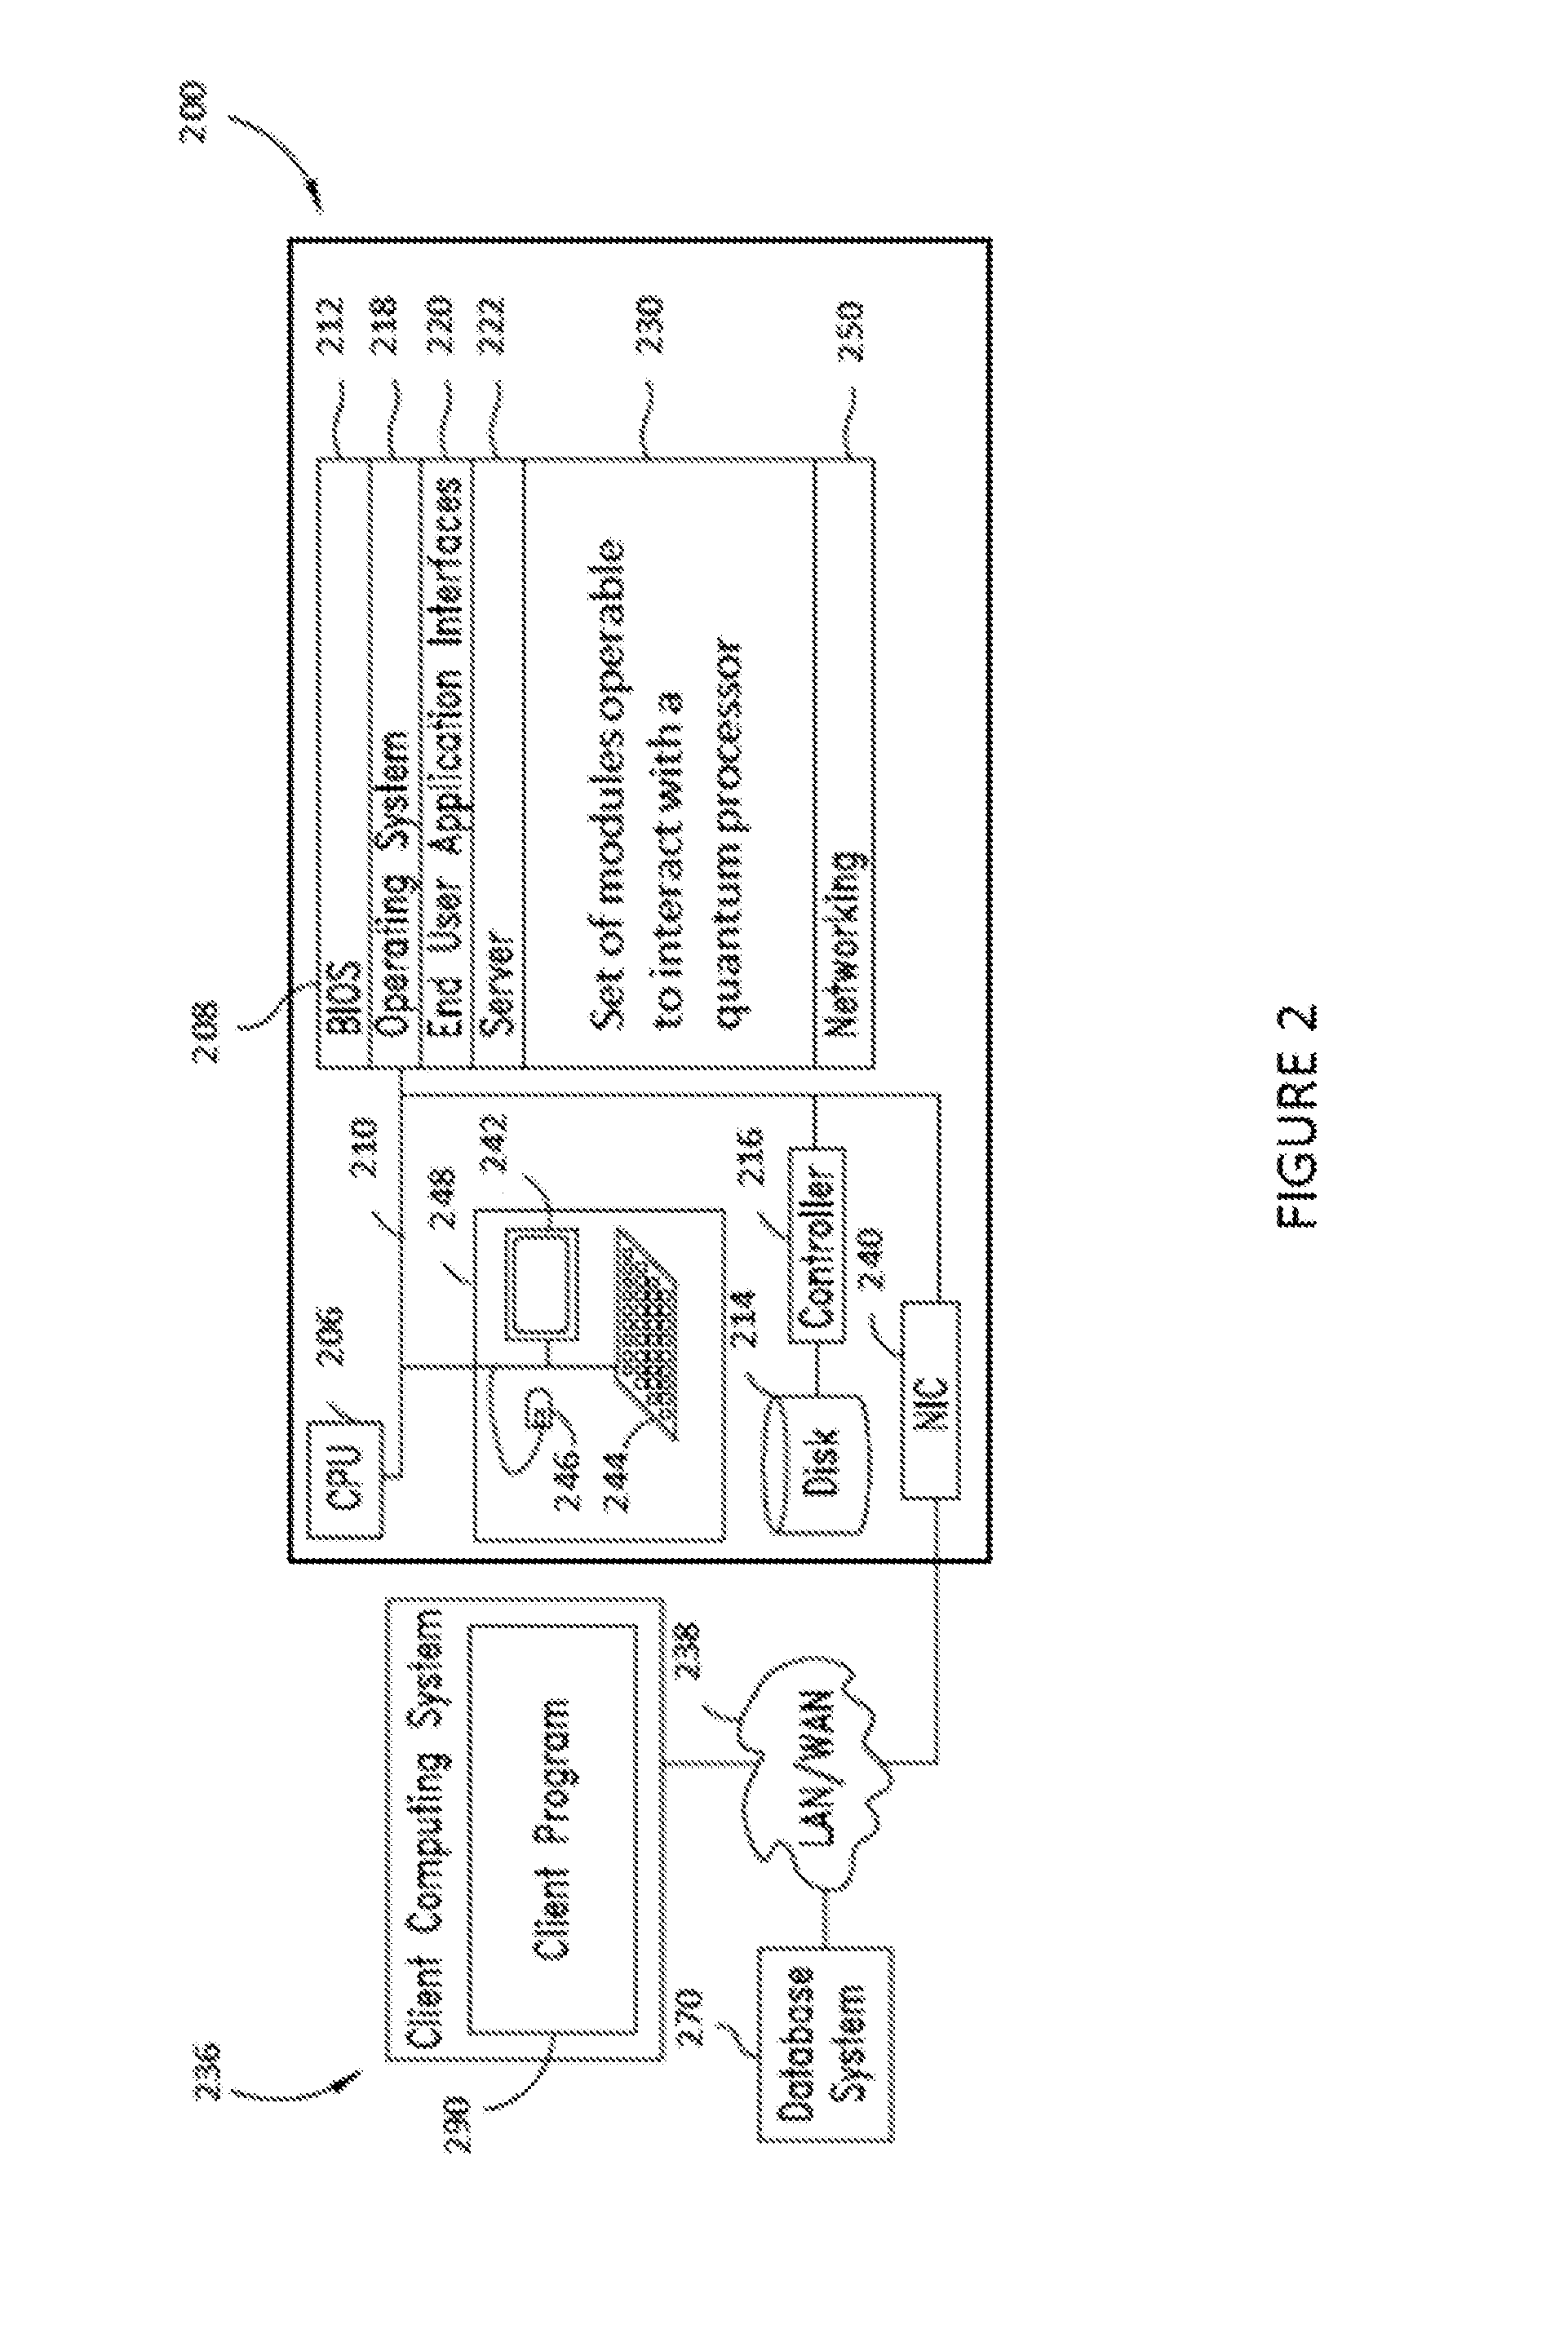 Quantum processor based systems and methods that minimize a continuous variable objective function